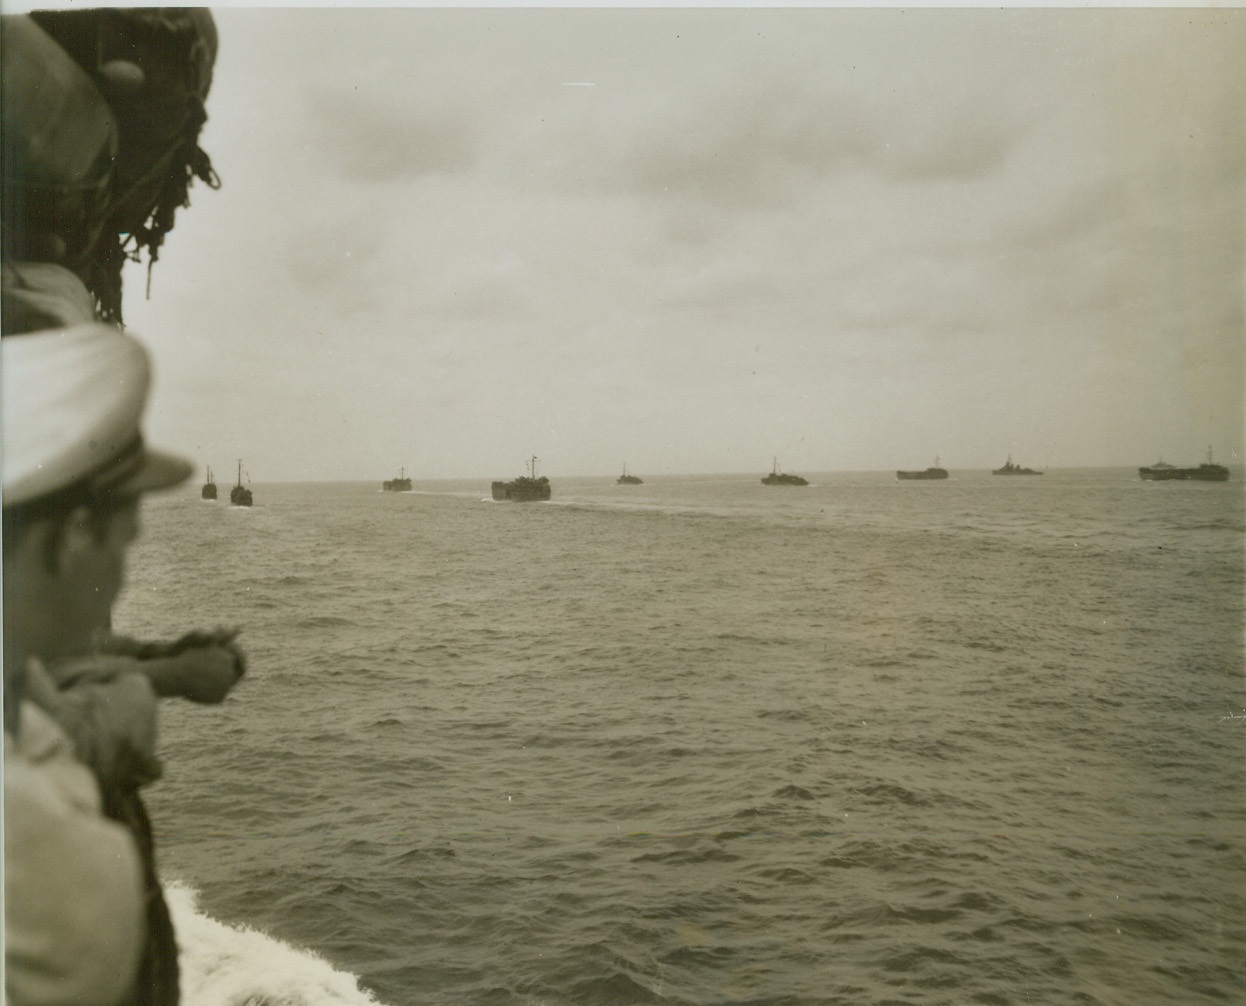 PART OF HOLLANDIA INVASION FLEET, 5/3/1944. DUTCH NEW GUINEA – Landing craft and small warships of the great Allied Task Force that invaded Hollandia, Aitape, and Tanamerah Bay, near the coast of Dutch New Guinea during the attack. (Passed by censors.) Credit: ACME photo by Thomas L. Shafer for the War Picture Pool;